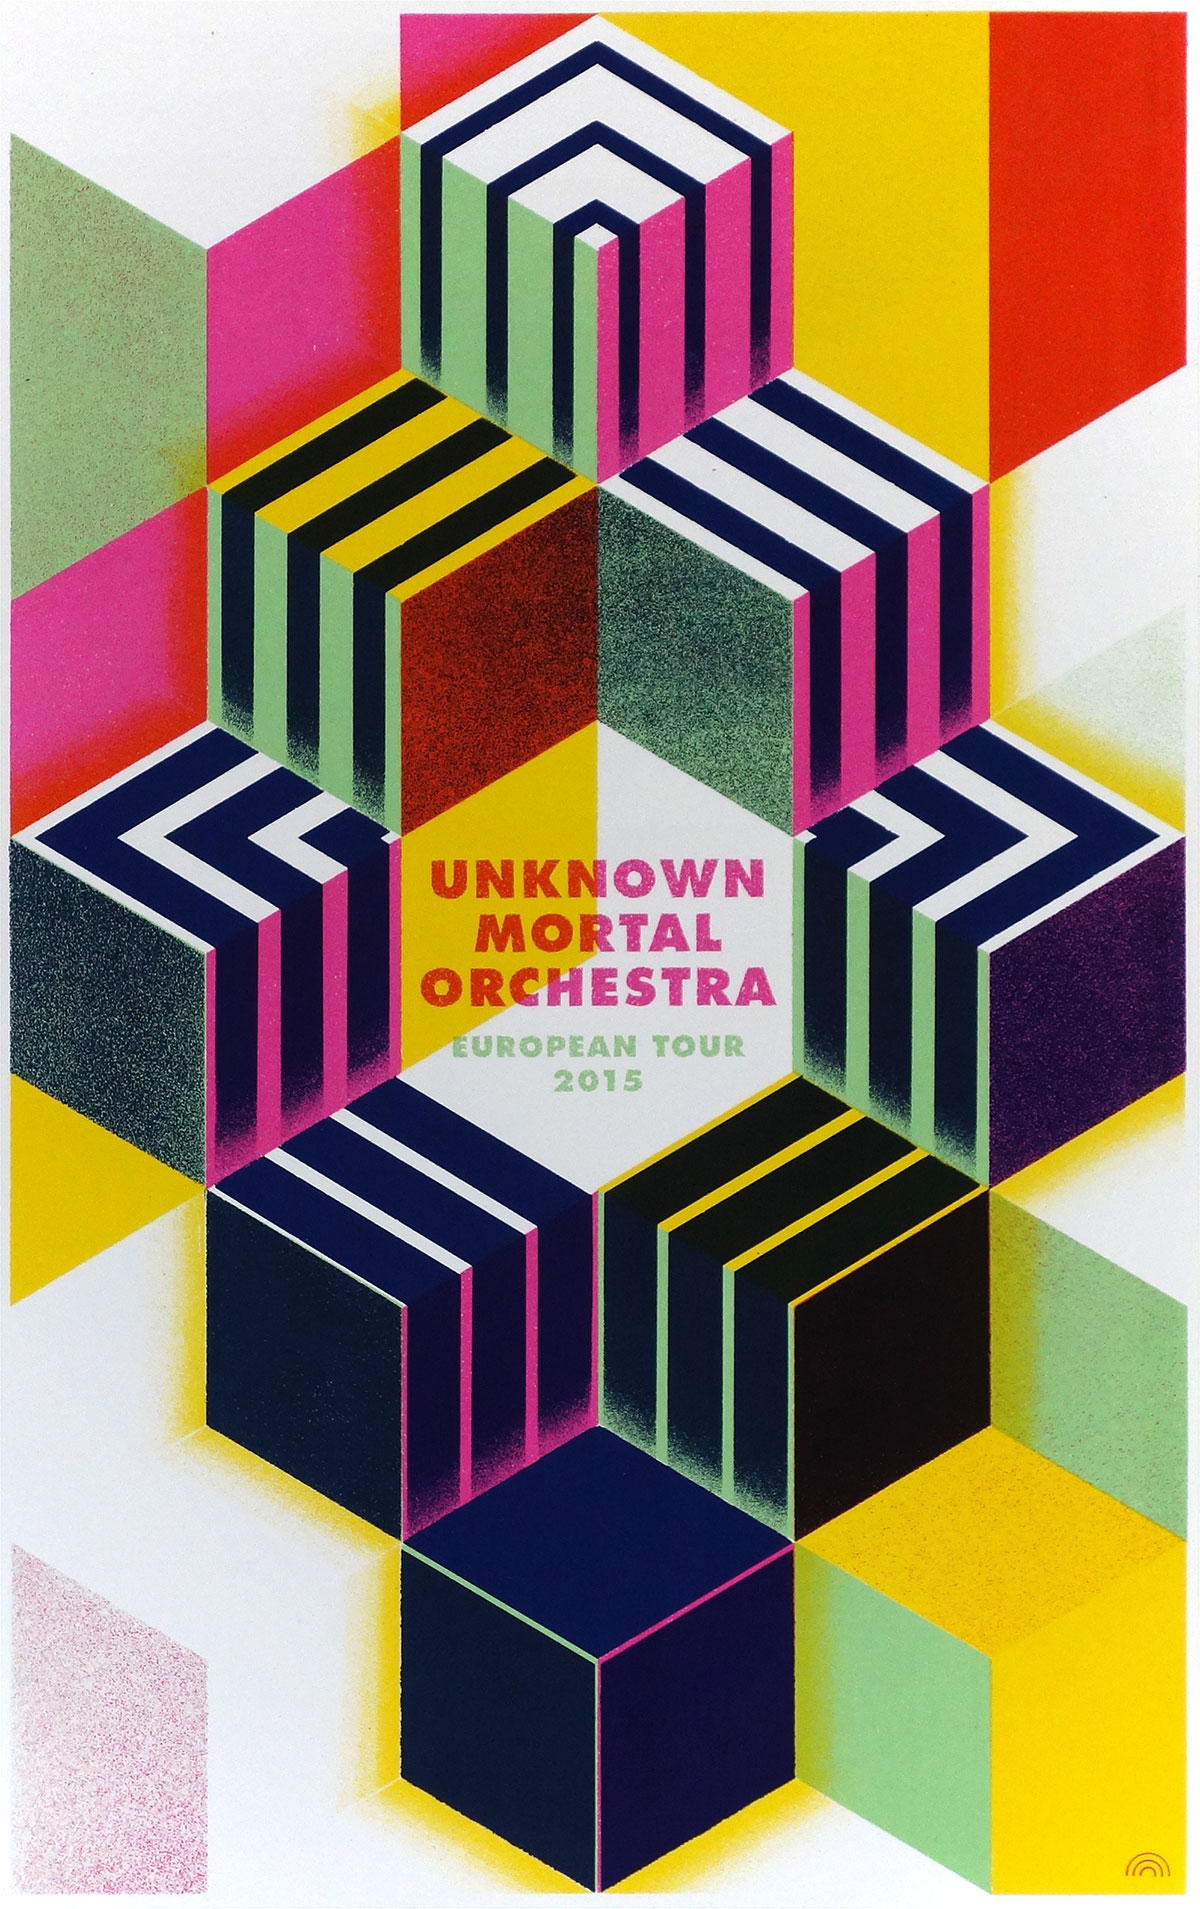 Unknown Mortal Orchestra gigposter 01 by Rainbow Posters